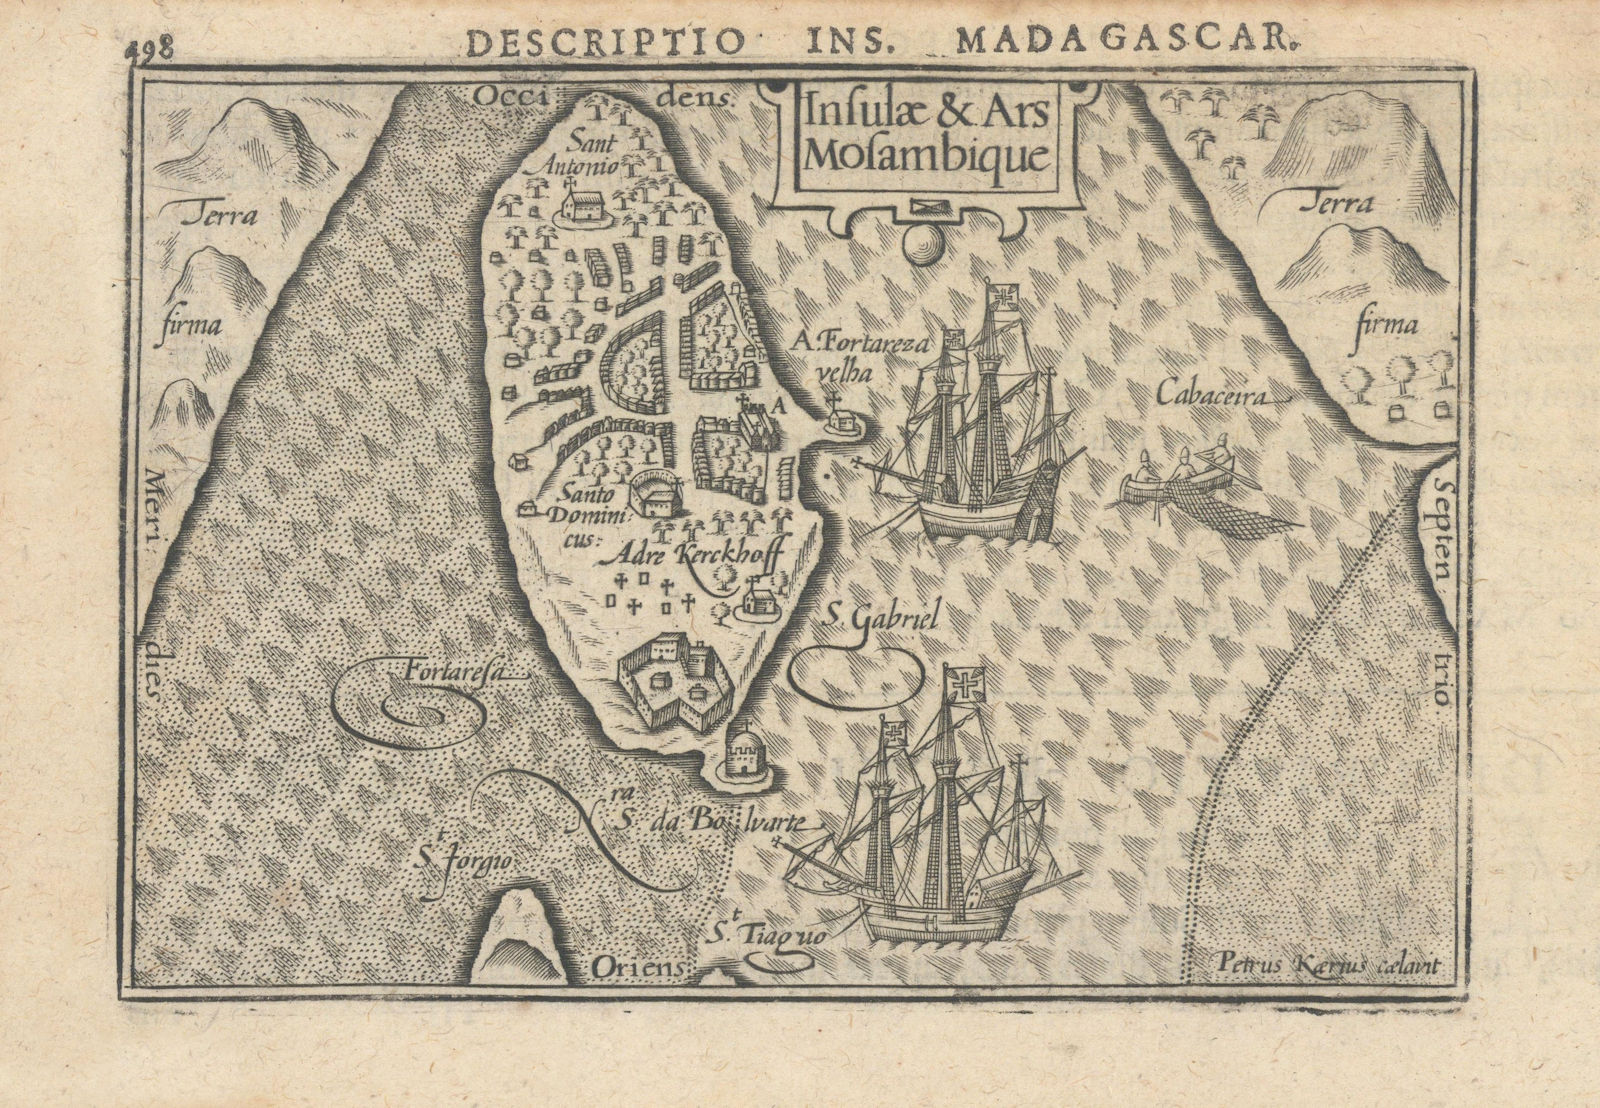 Insulae & Ars Mozambique by Bertius / Langenes. Mozambique Island 1603 old map